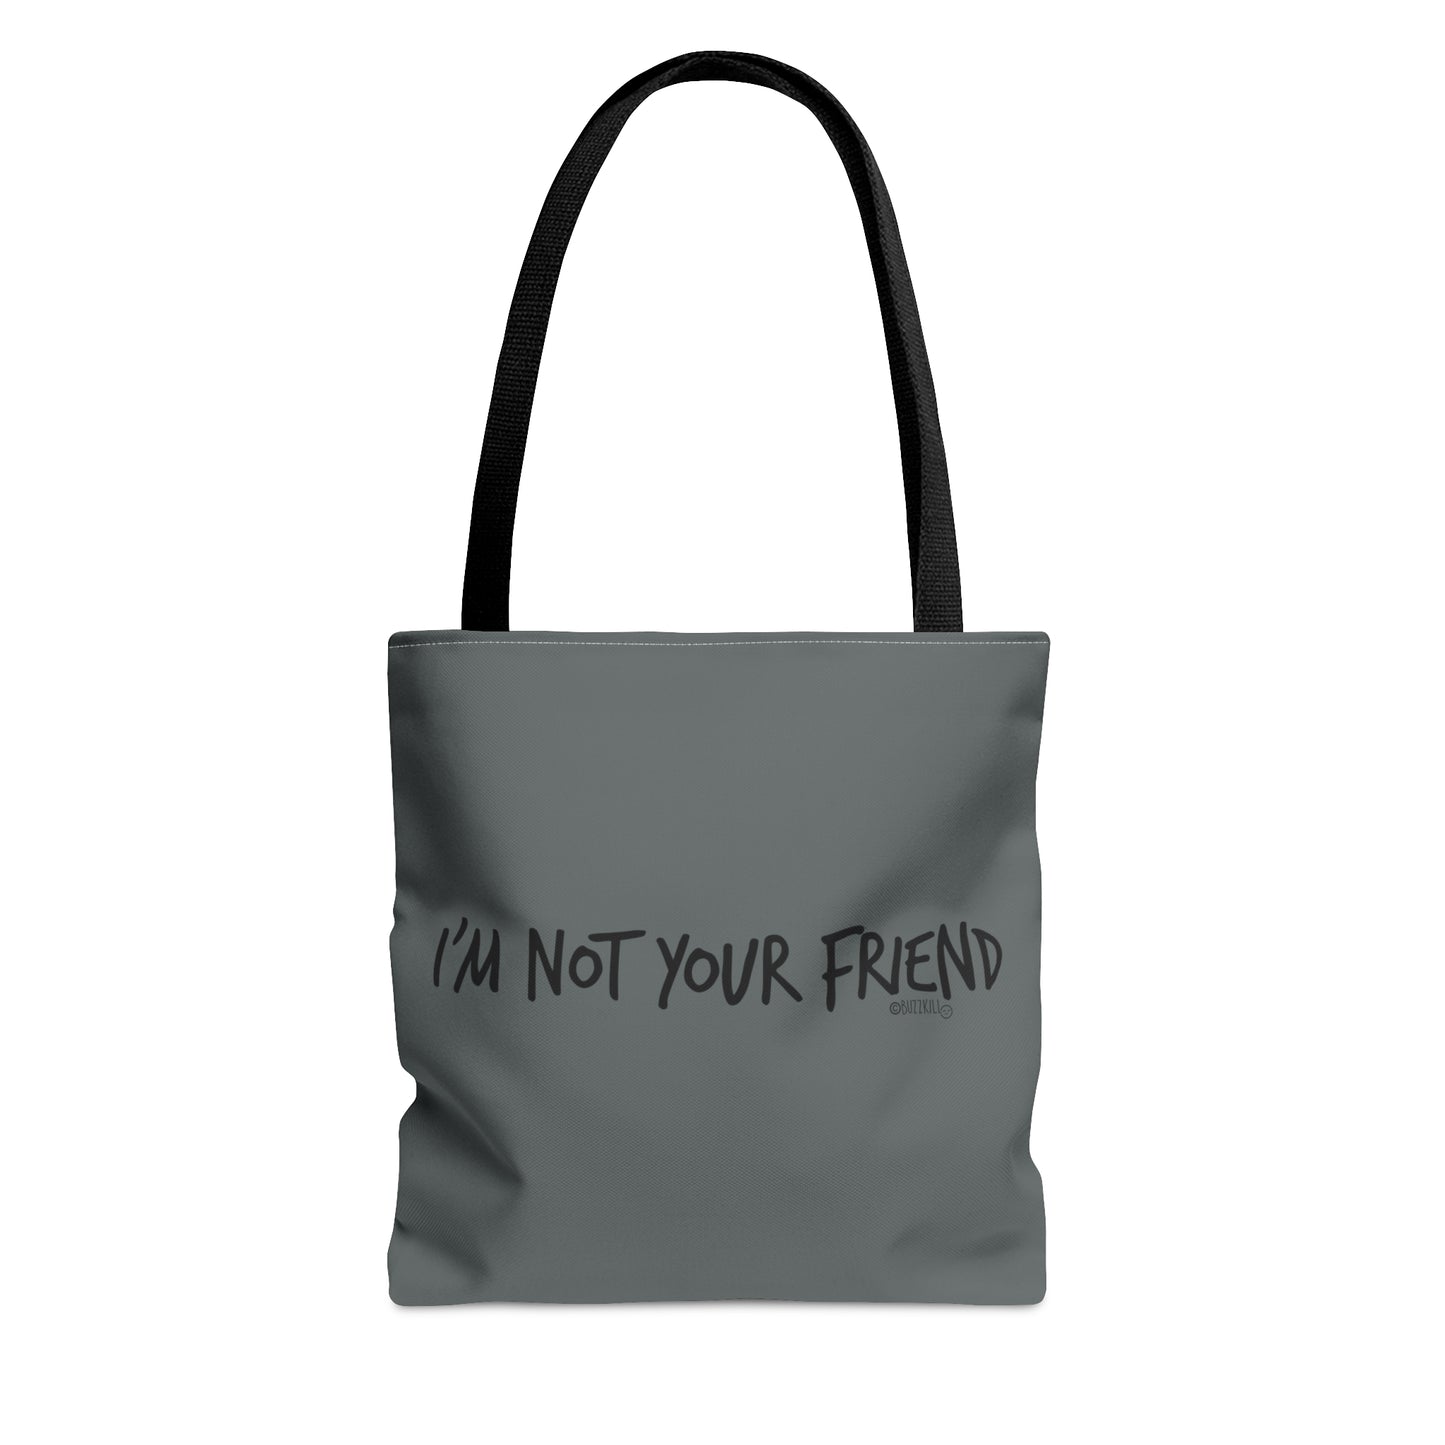 I'm Not Your Friend - Tote Bag